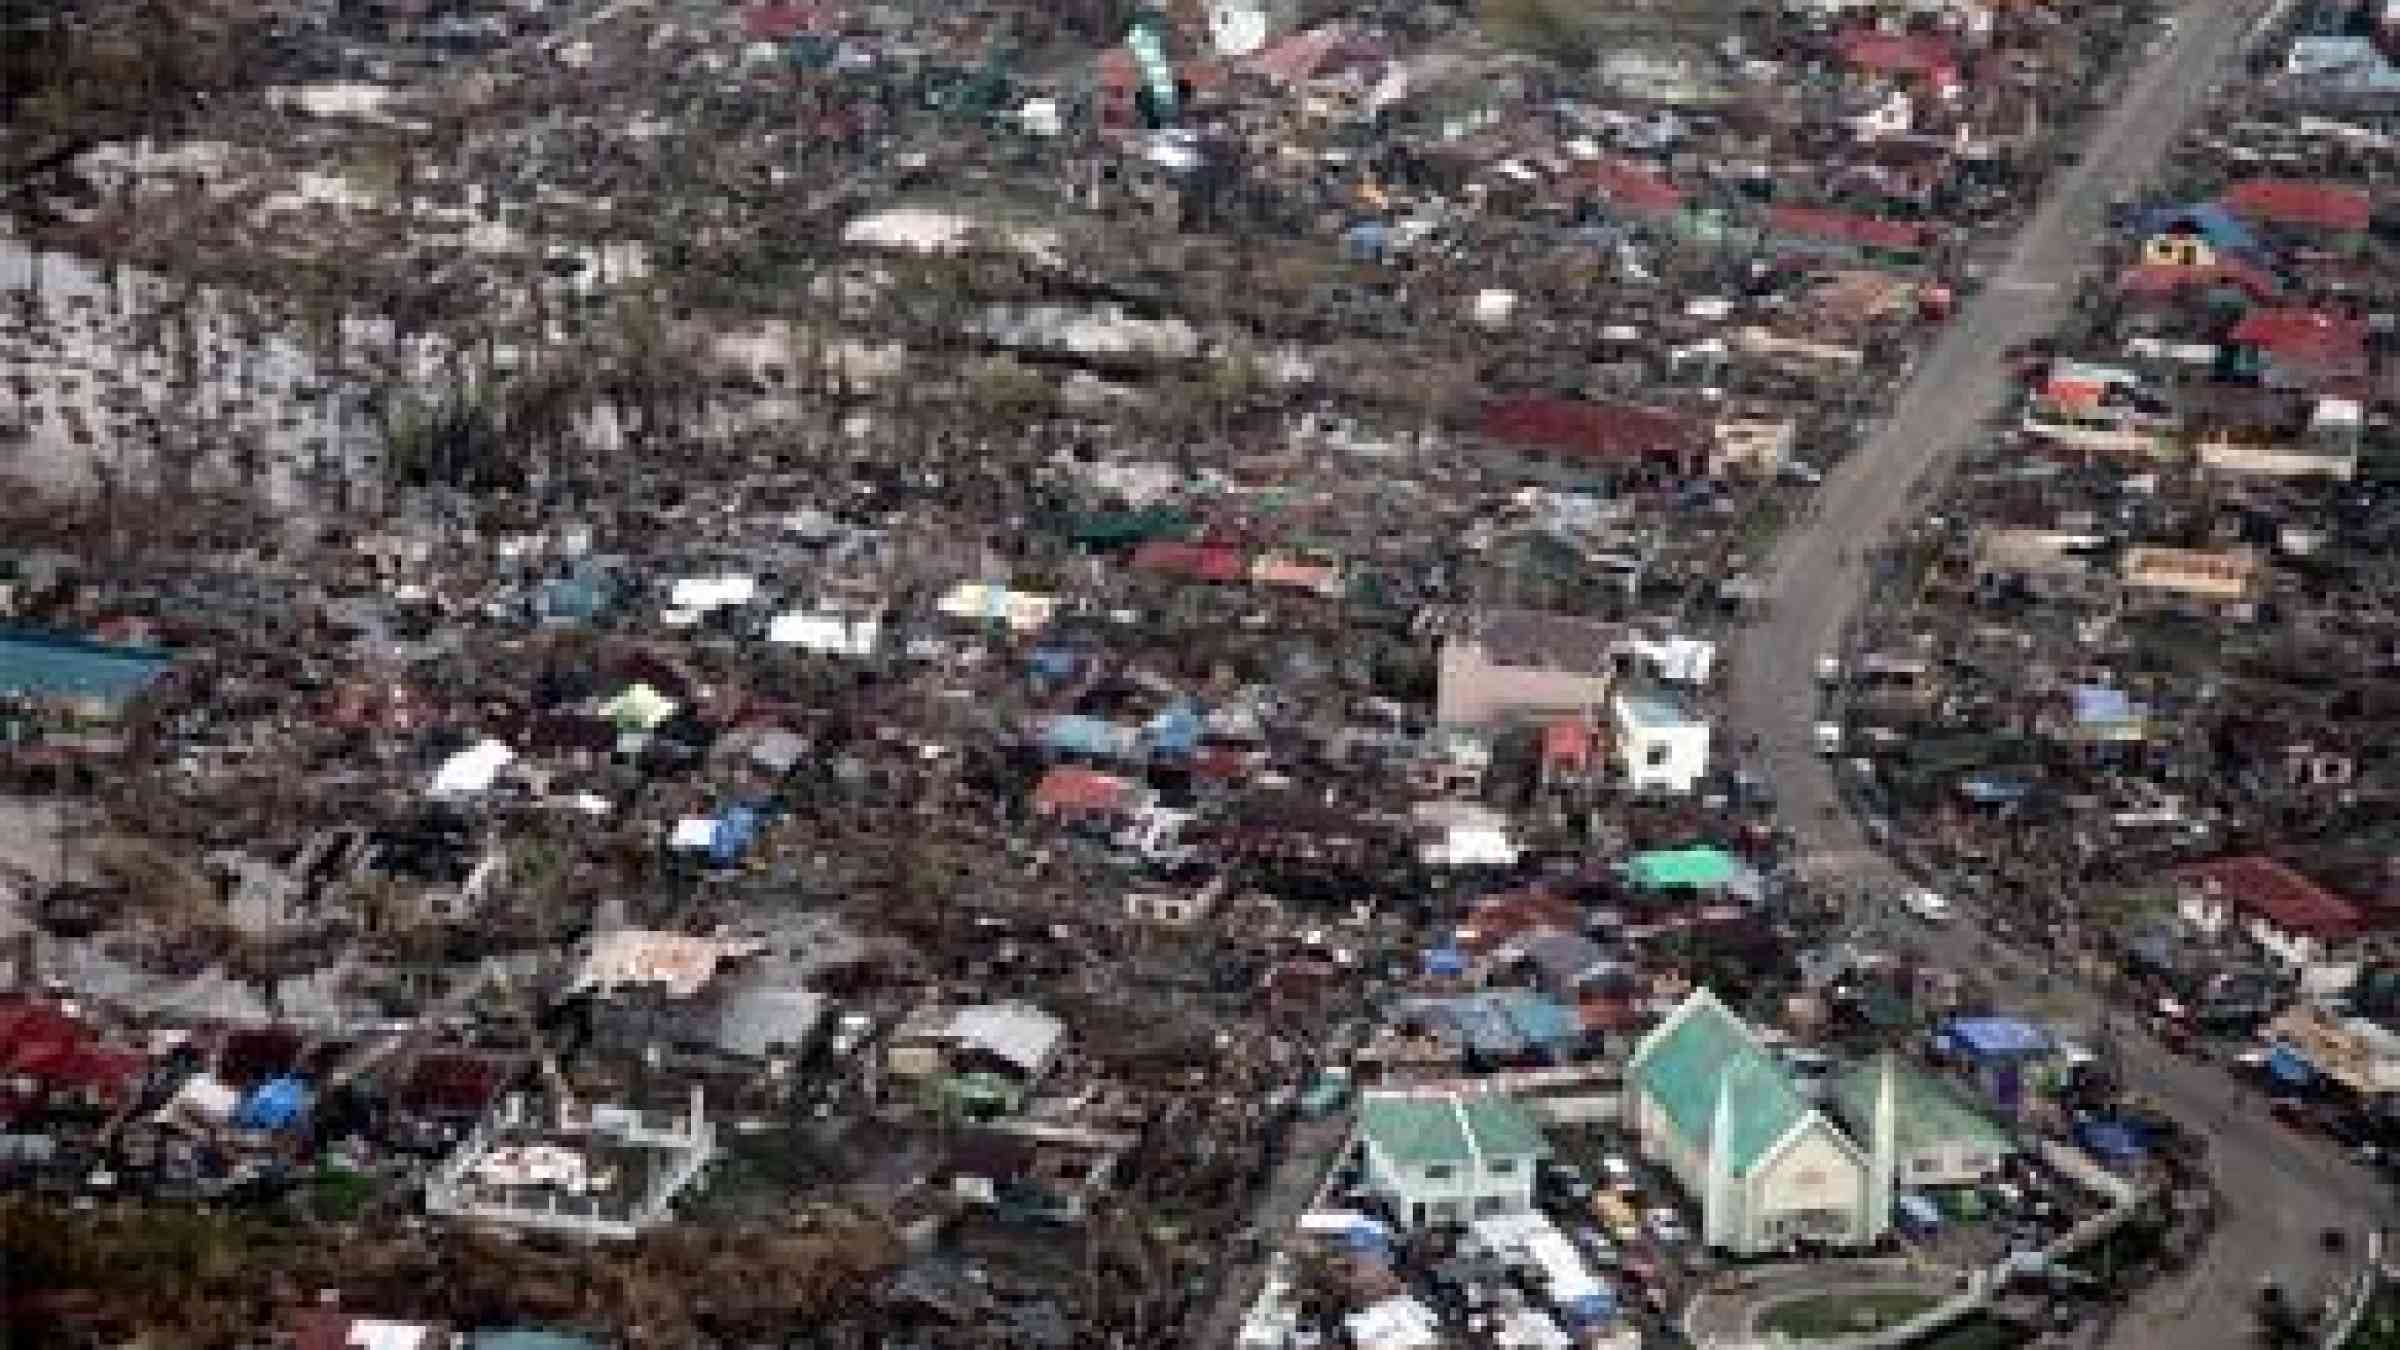 Aerial view of Tacloban after Typhoon Haiyan by DFID https://www.flickr.com/photos/dfid/11043346434 CC BY 2.0